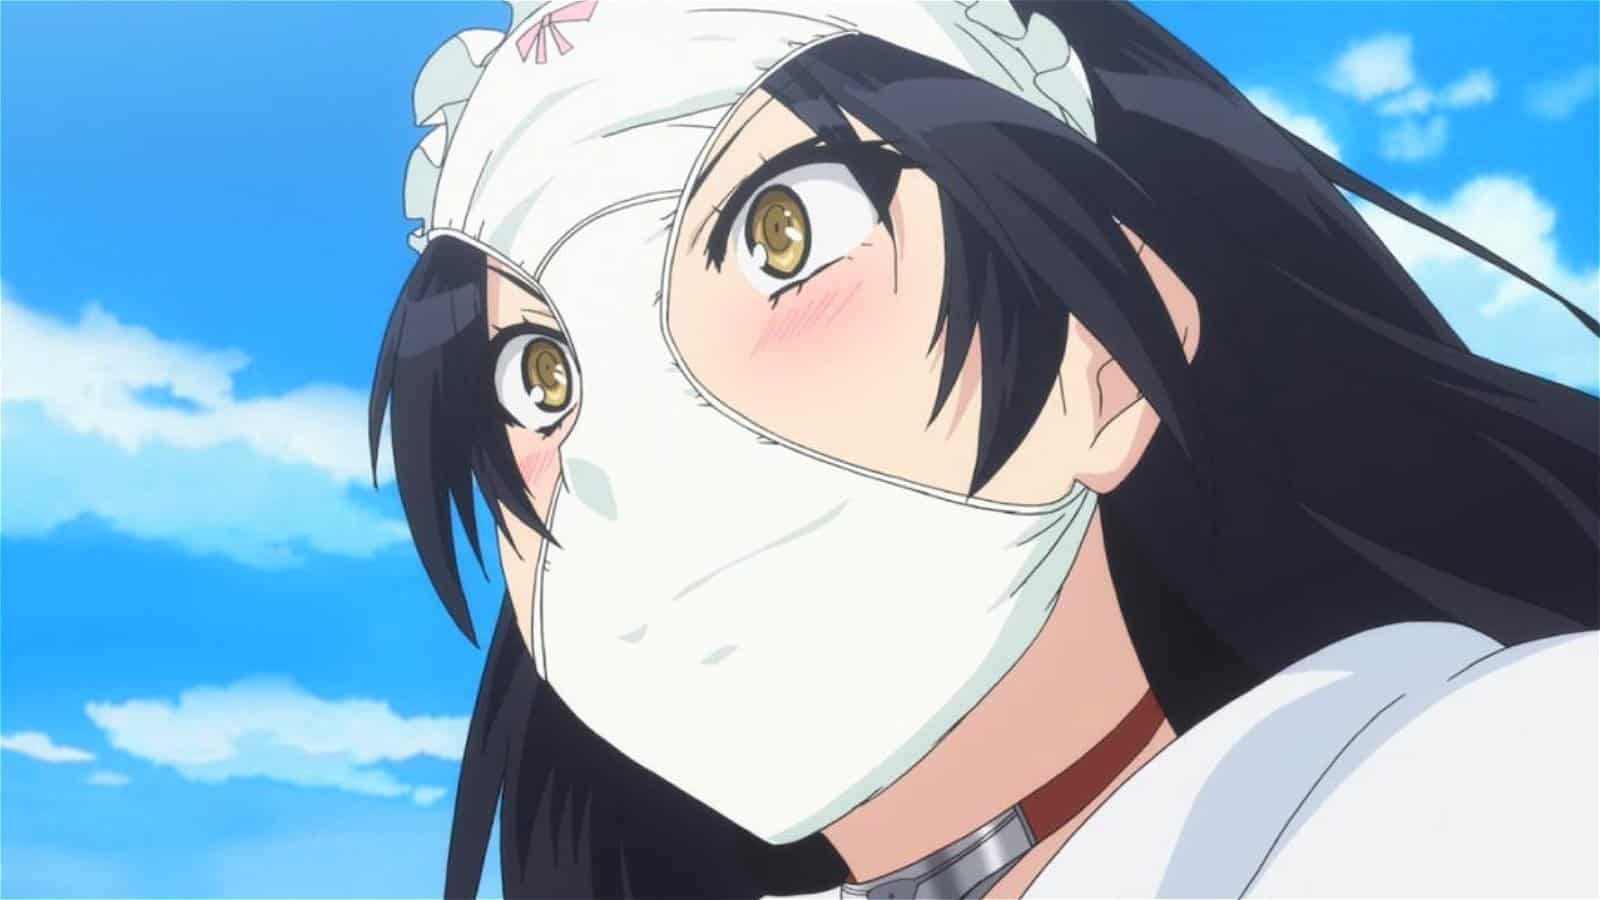 A character from Shimoneta with a pair of underwear on her head.